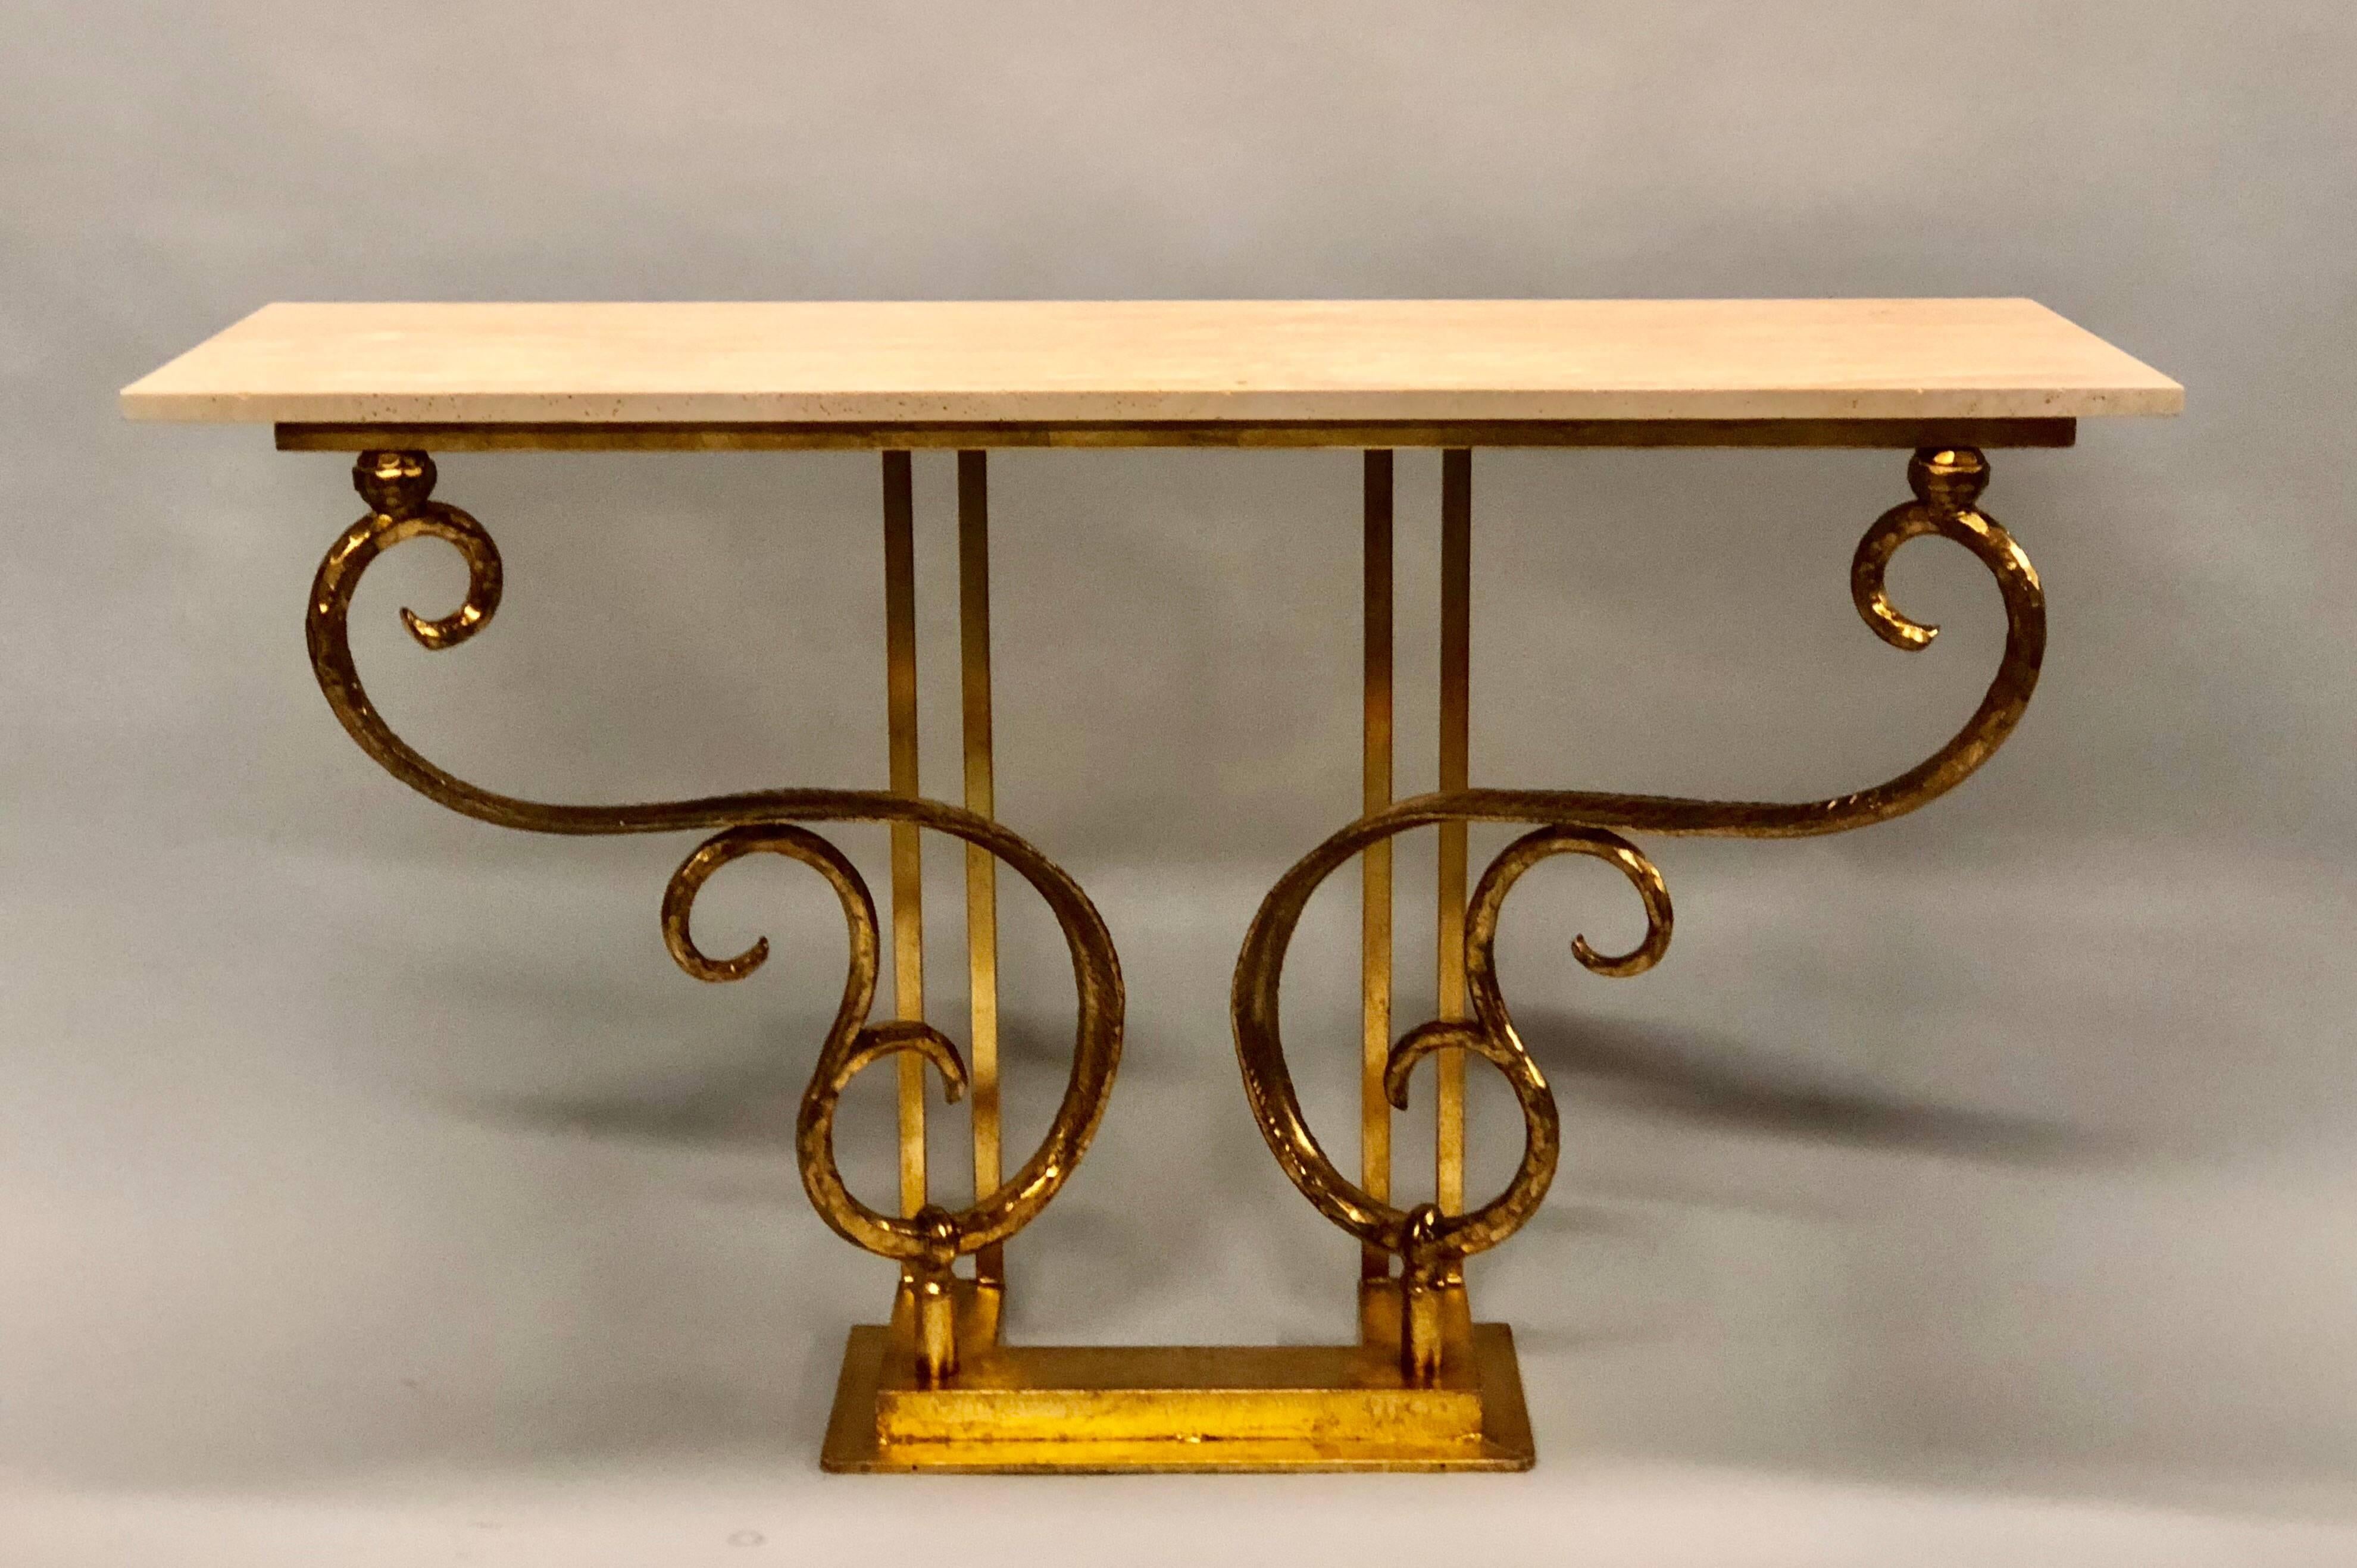 Two Italian Mid-Century Modern hand-hammered iron consoles or sofa tables by Italian sculptor and designer, Giovanni Banci. The pieces have been hand gilt and feature an undulating, organic form, floral inspired base and have Roman travertine